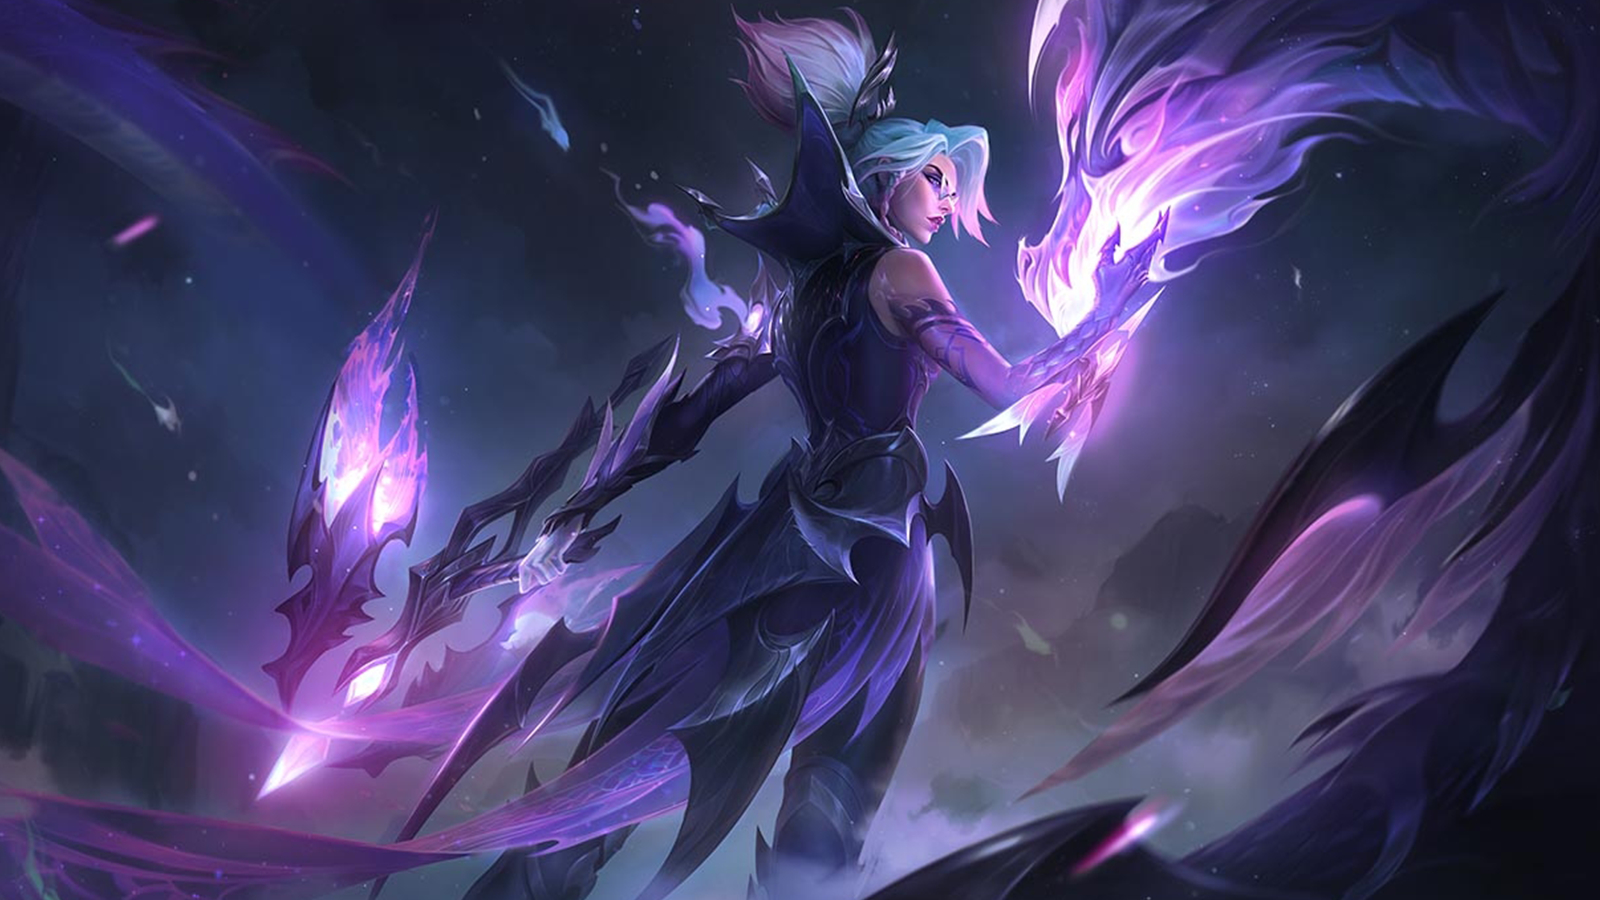 Dragonmancer Vayne from League of Legends poses with two glowing purple hand guns